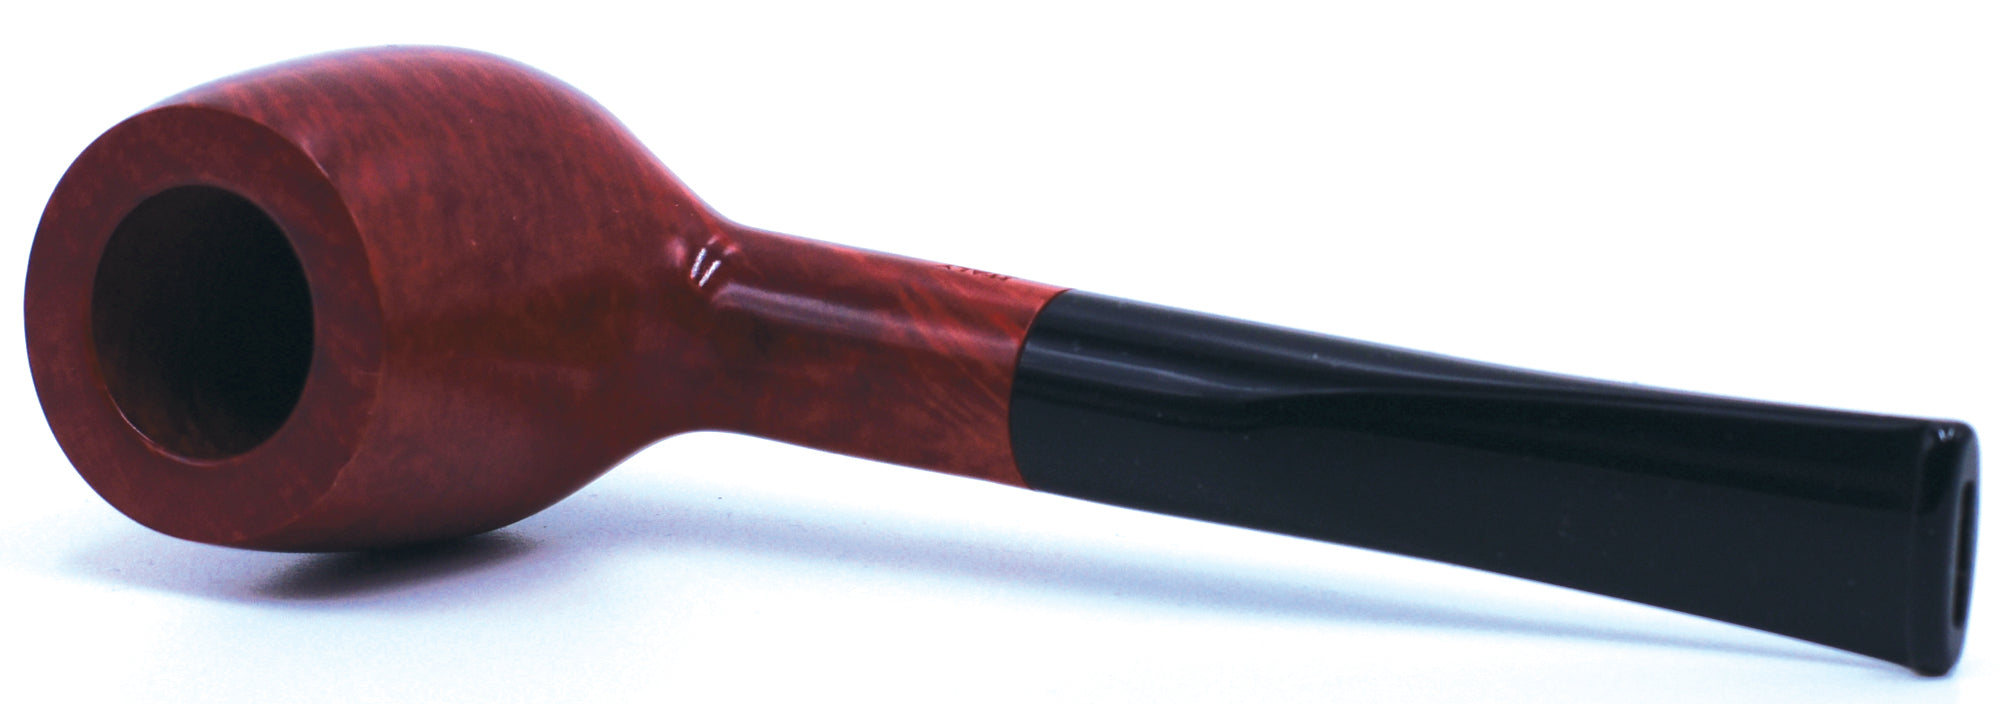 LEGENDEX® PAGANINI* 9 MM Filtered Briar Smoking Pipe Made In Italy 01-08-334